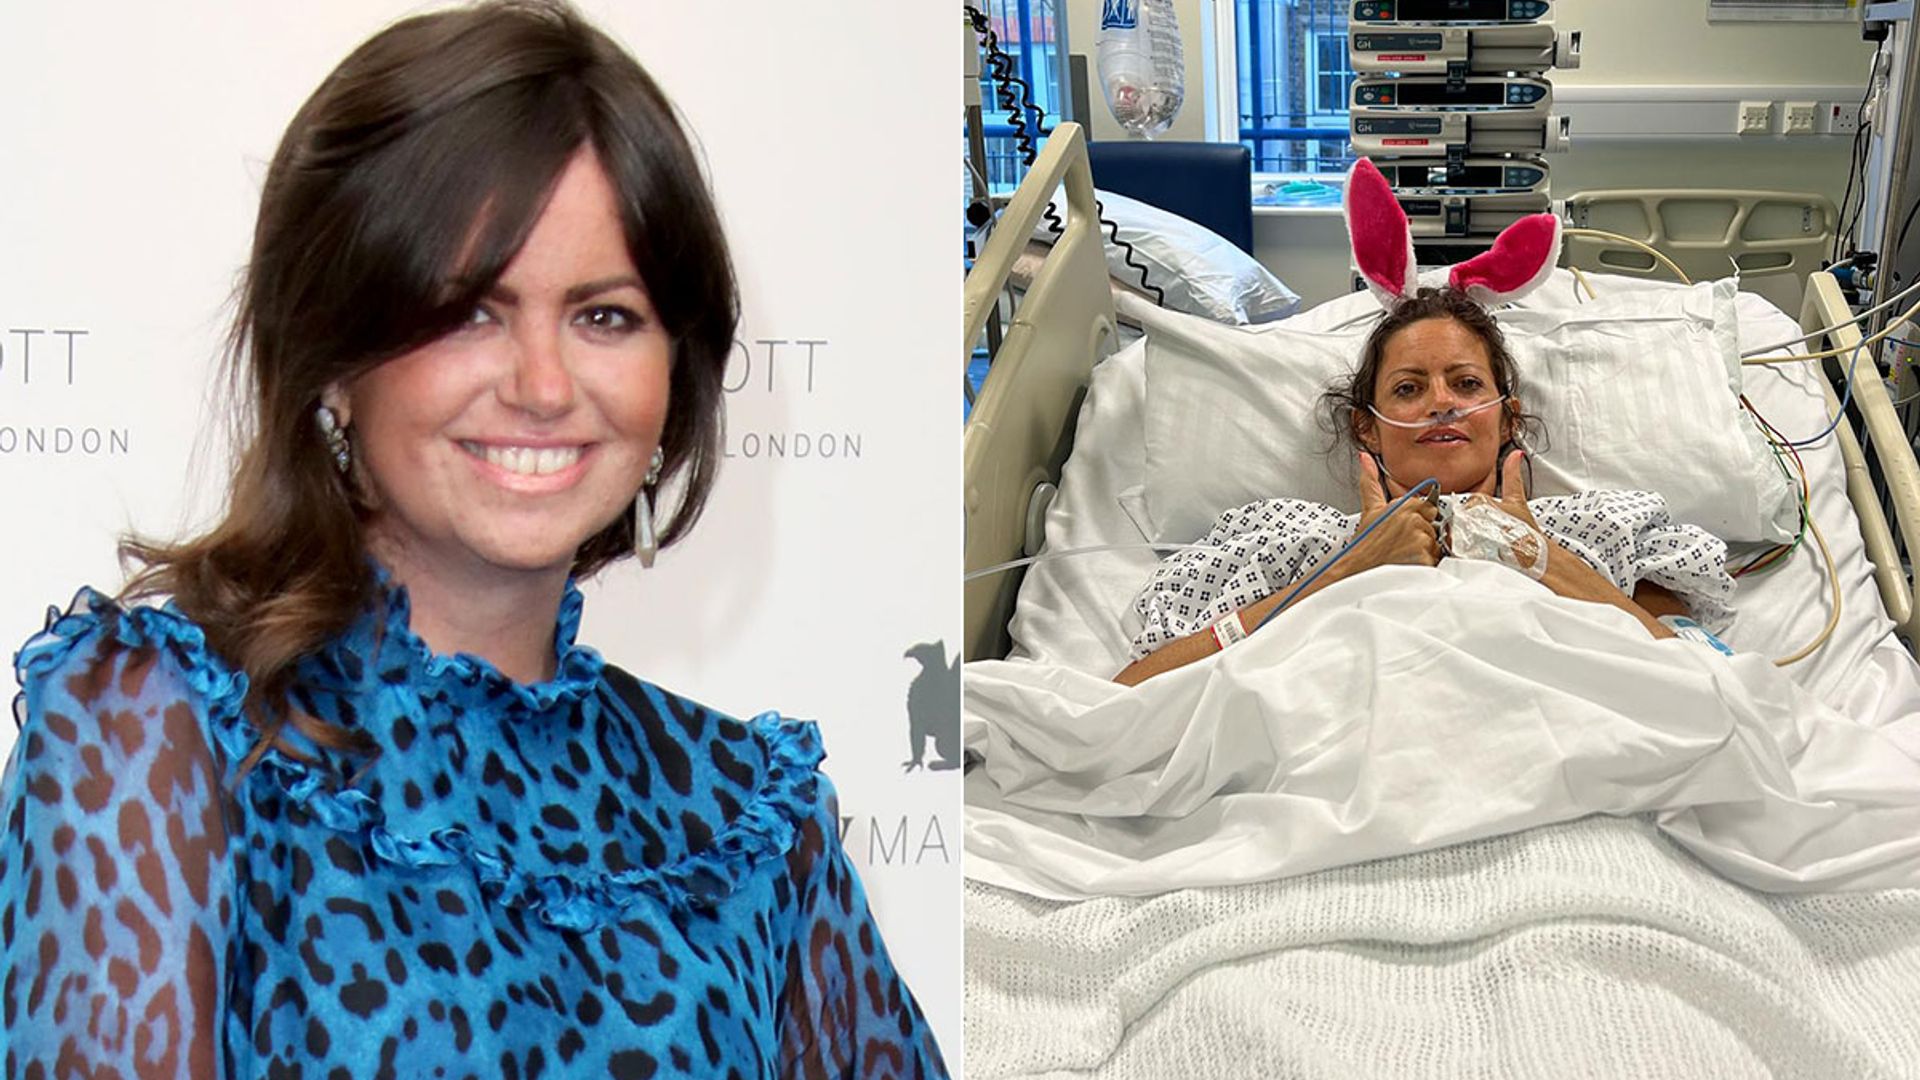 Bowel Babe campaigner Deborah James dies aged 40 after 'touching the nation' amid cancer battle